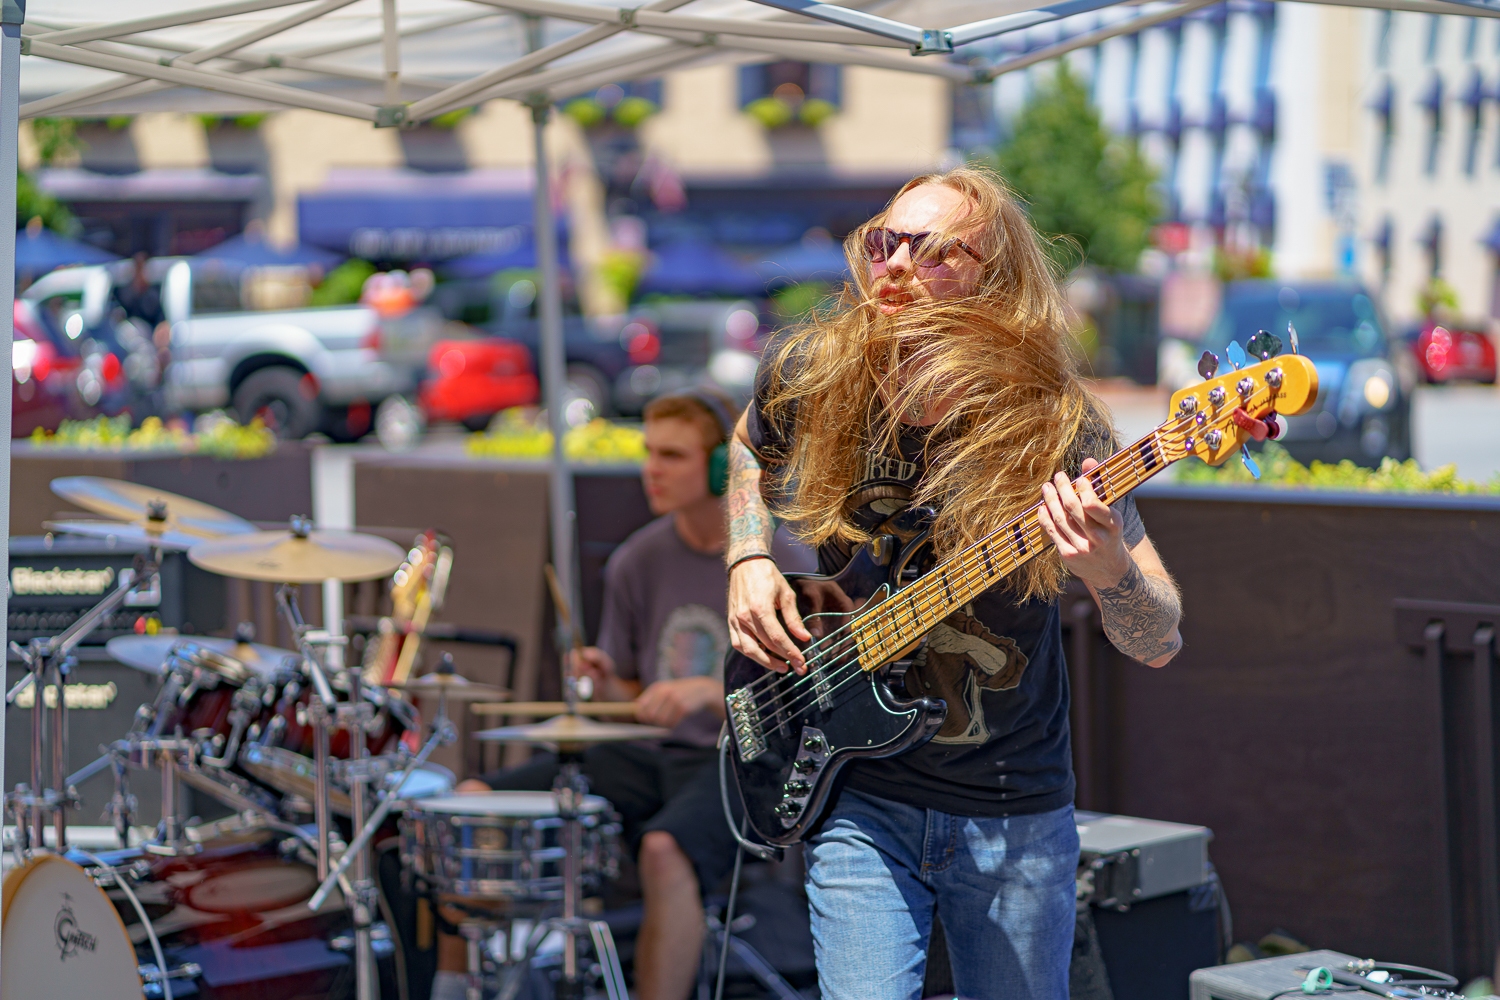 Gettysburg, PA, USA – July 3, 2022: A local band rocks the downtown square over the July 4th celebration with loud music and wild hair to the delight of Adams County, PA.